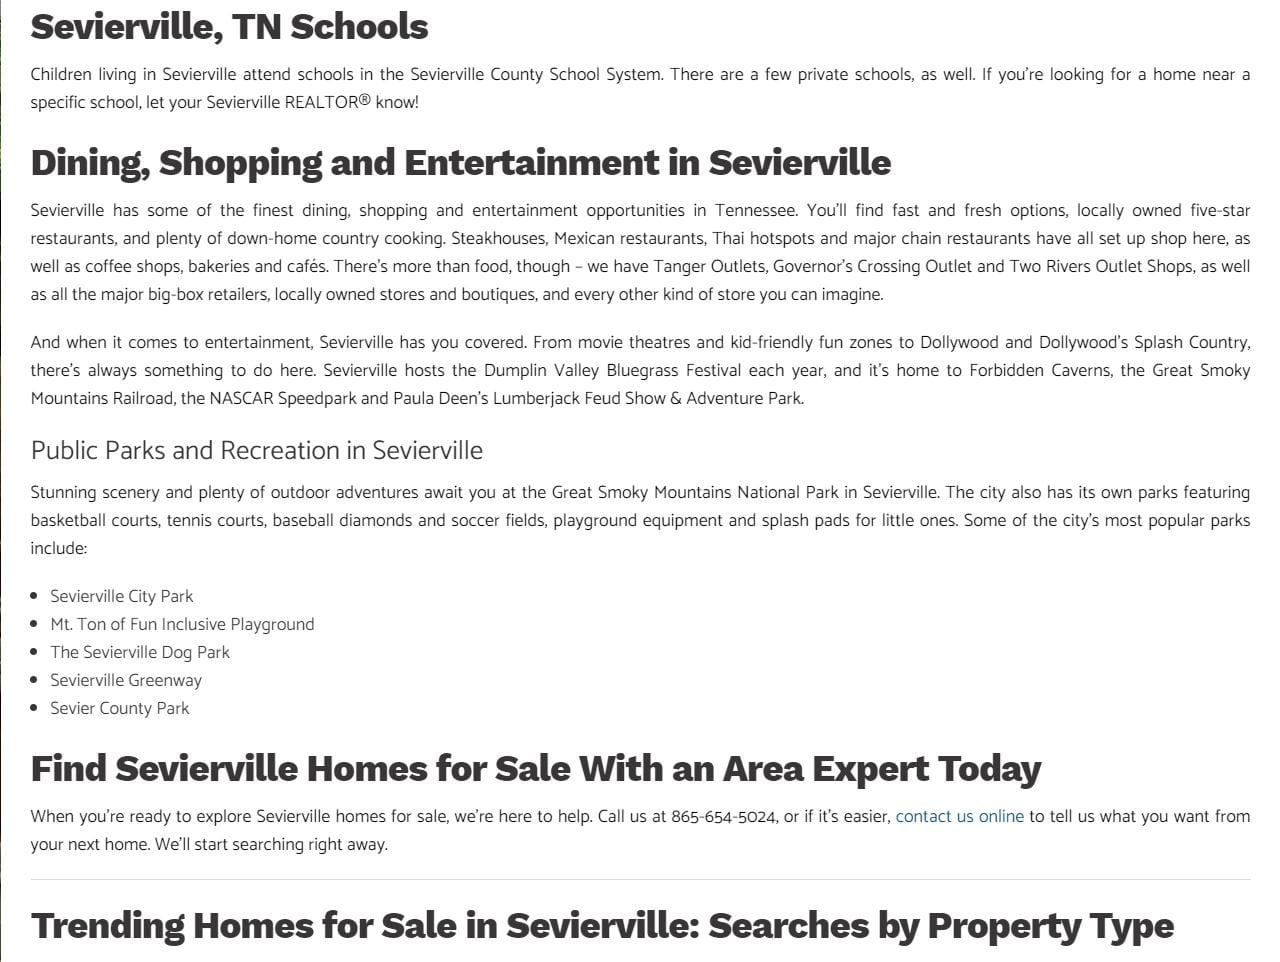 Content to Get Real Estate Leads by Angie Papple Johnston - Tennessee Real Estate Website Content